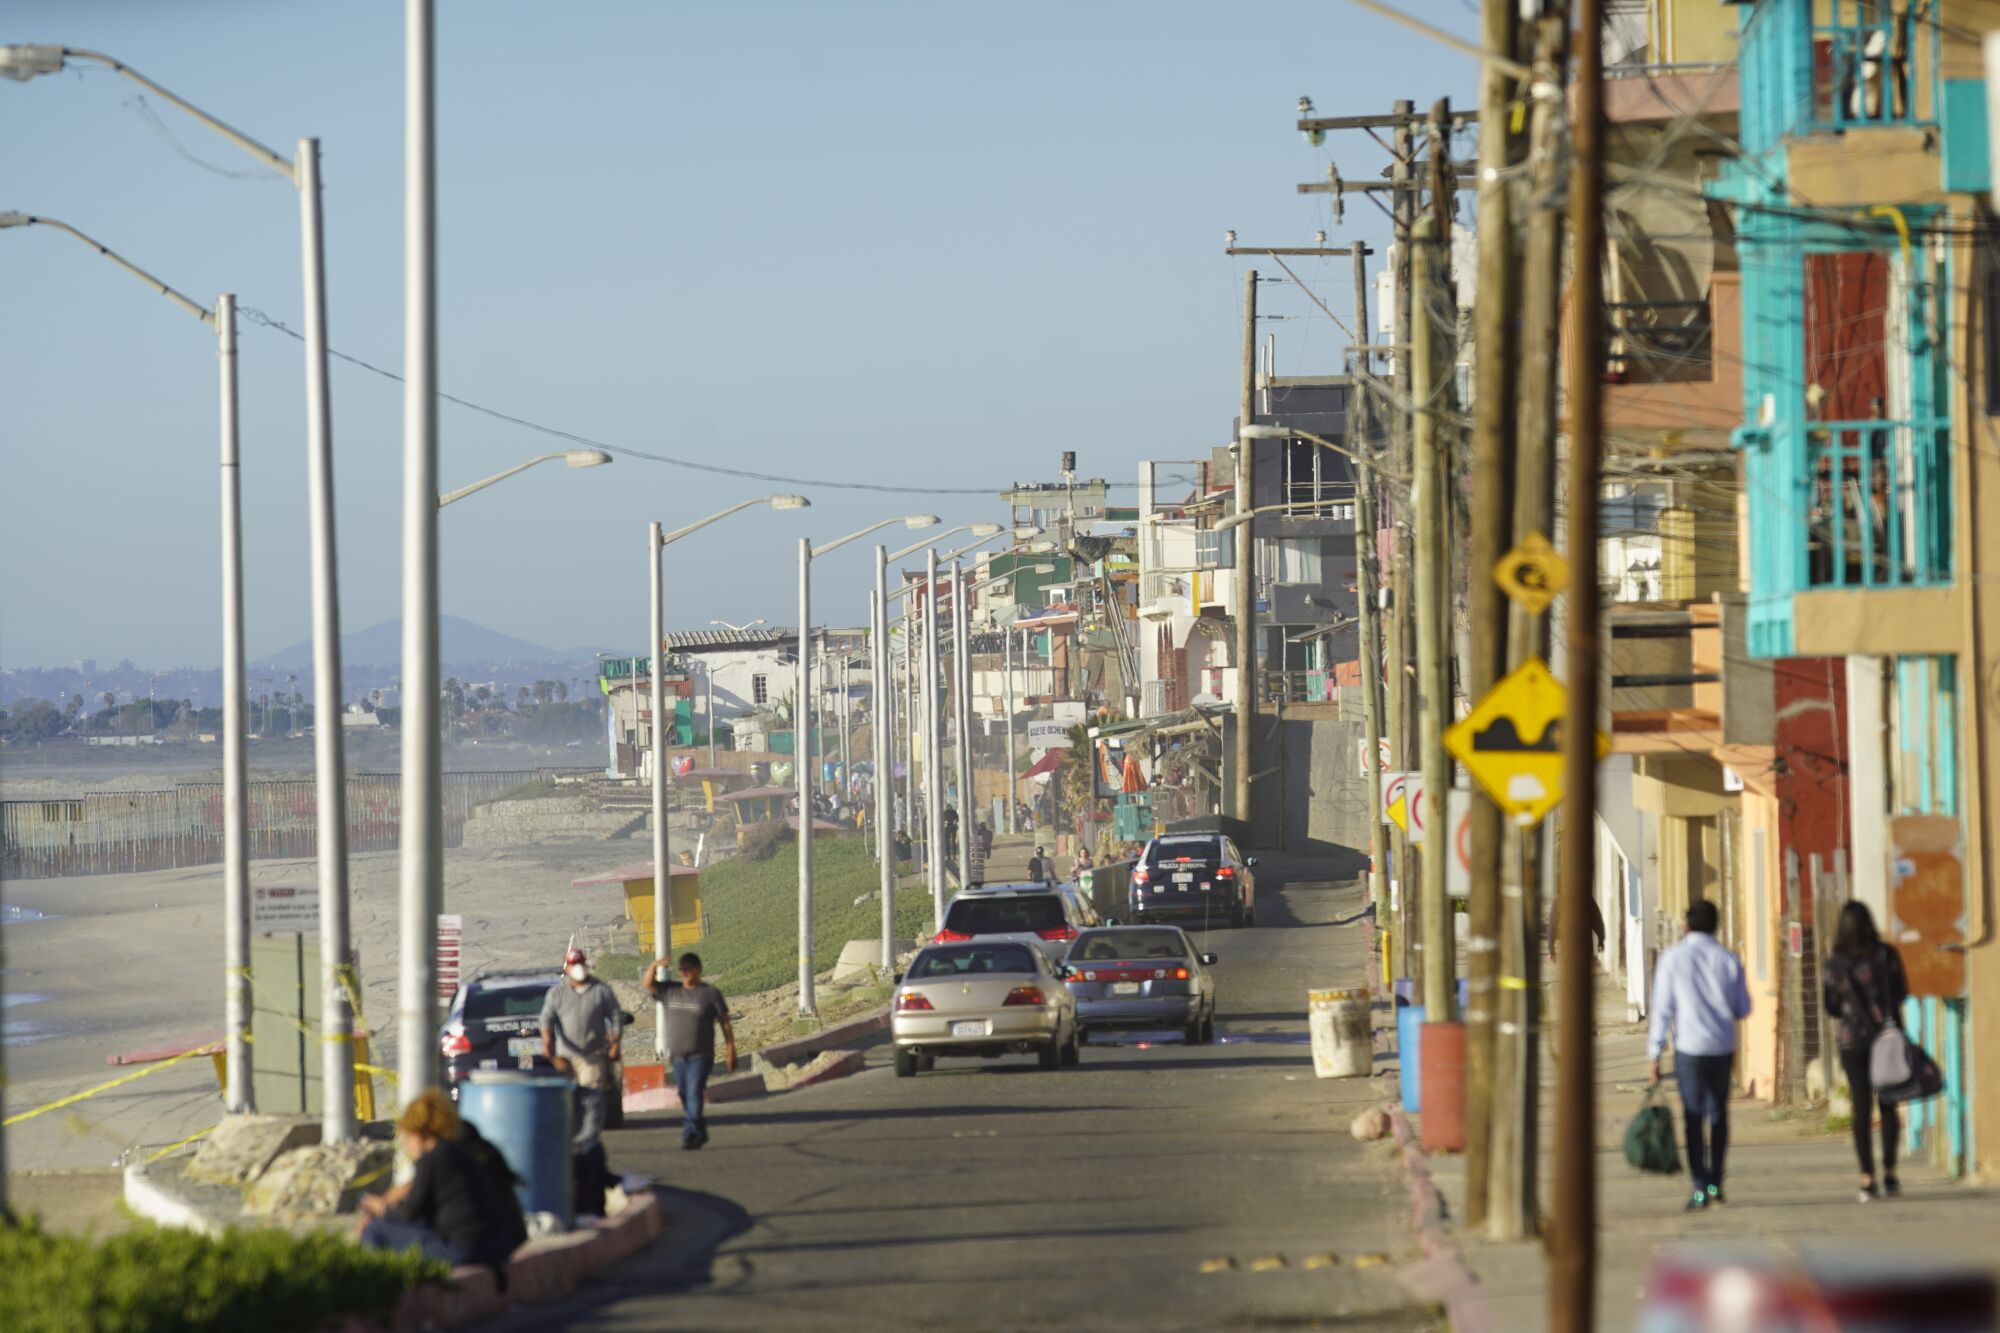  In the distance, the border fence and downtown San Diego can be seen from Playas de Tijuana.